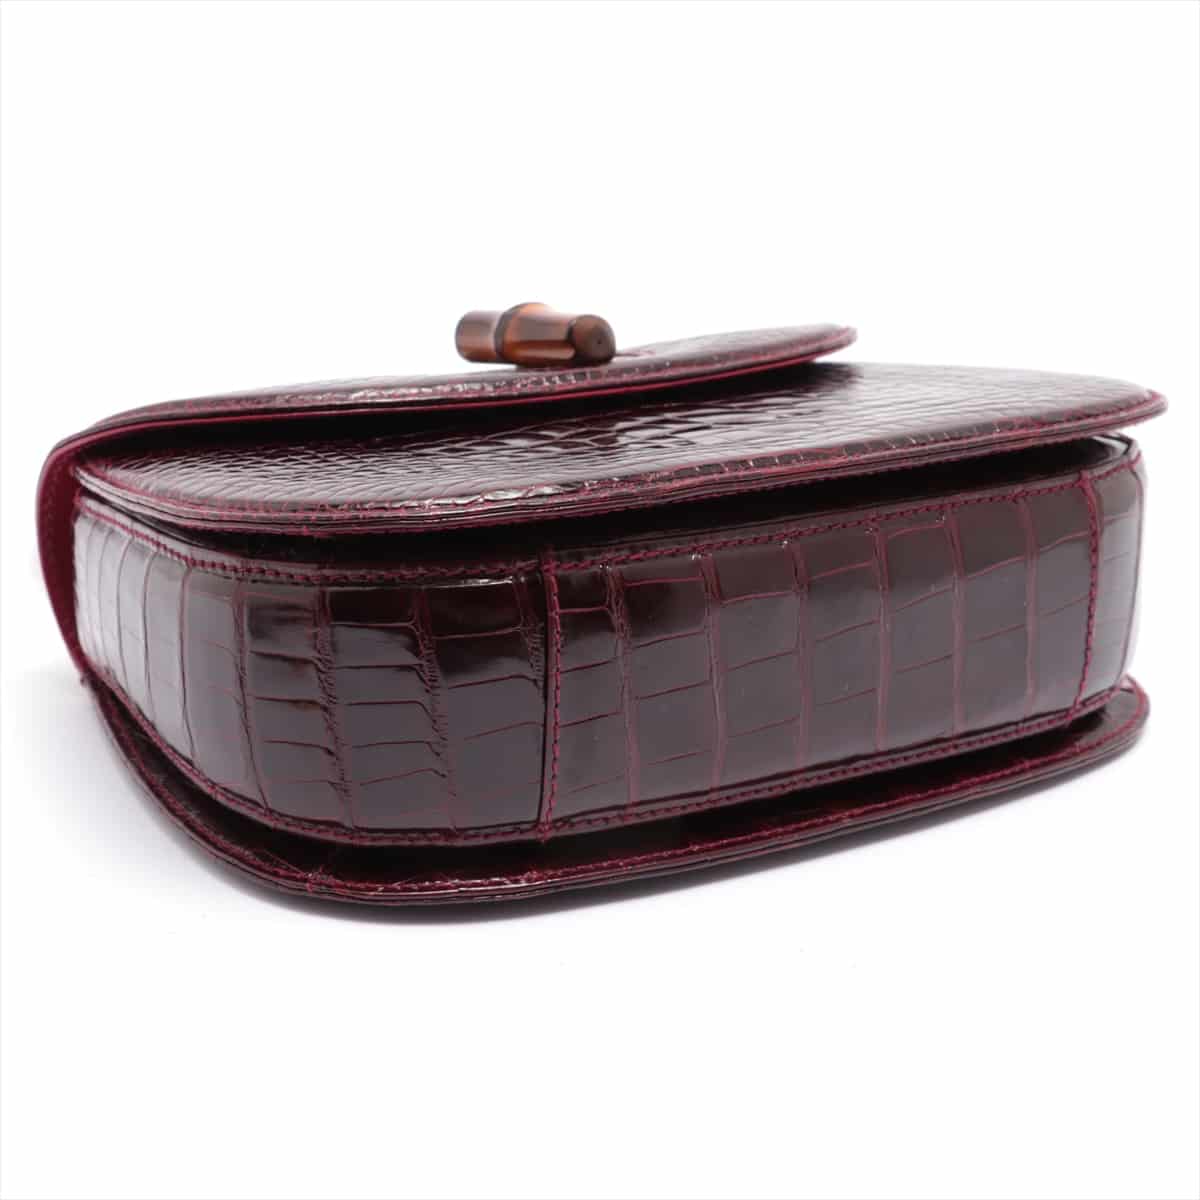 Gucci Bamboo Crocodile 2way shoulder bag Bordeaux 002 20460 Comes with a mirror pass case